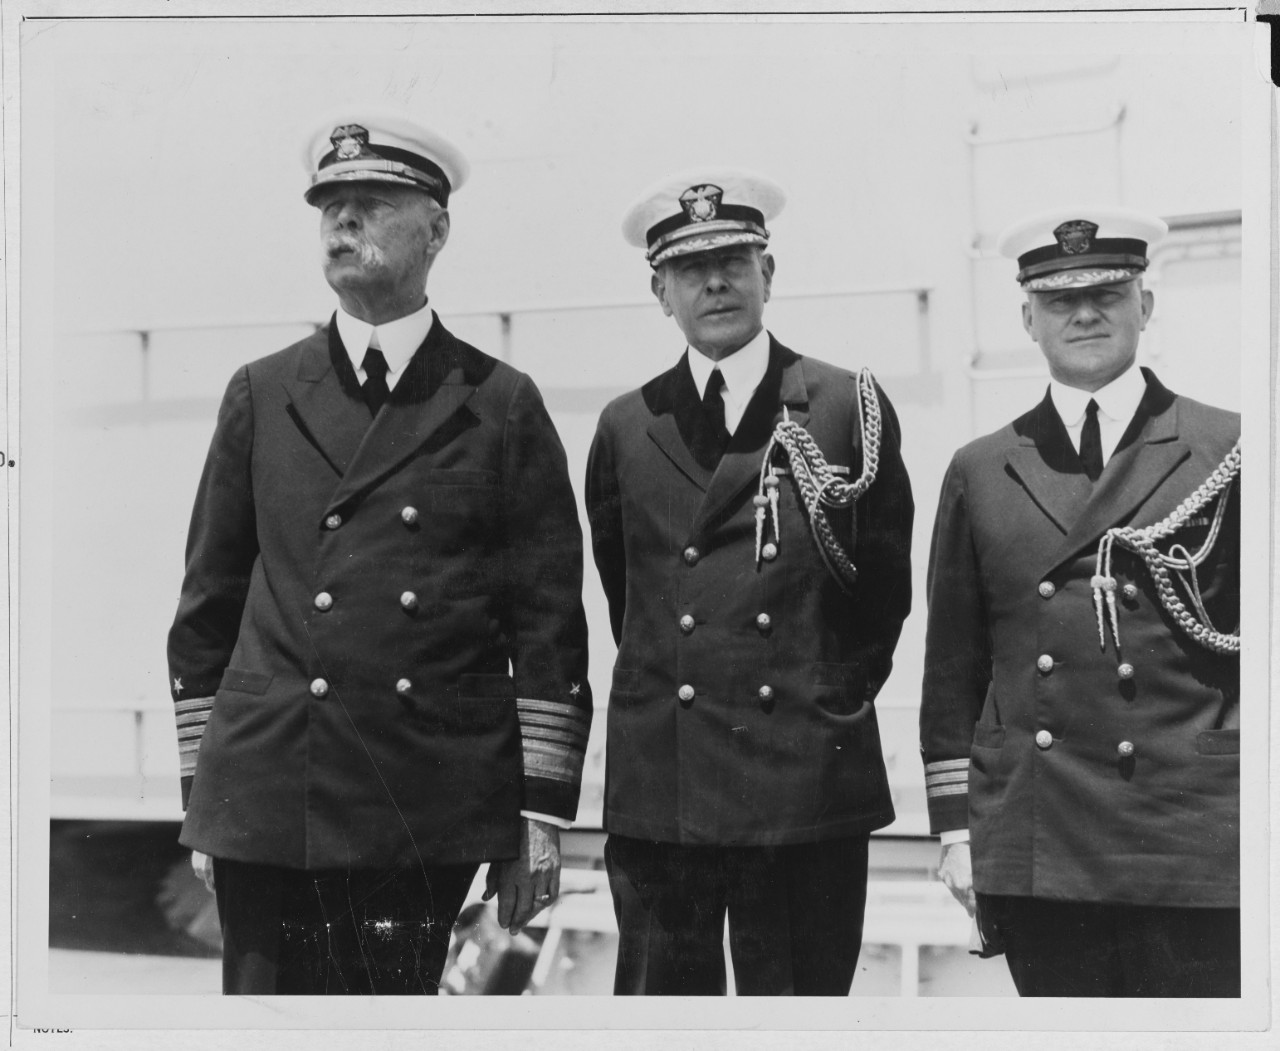 Hughes, C. F. Chief of Naval Operations, Neil George F. aide to Secretary of the Navy and Gygax, Felix X Comdr aide to chief of navy operations. 1930